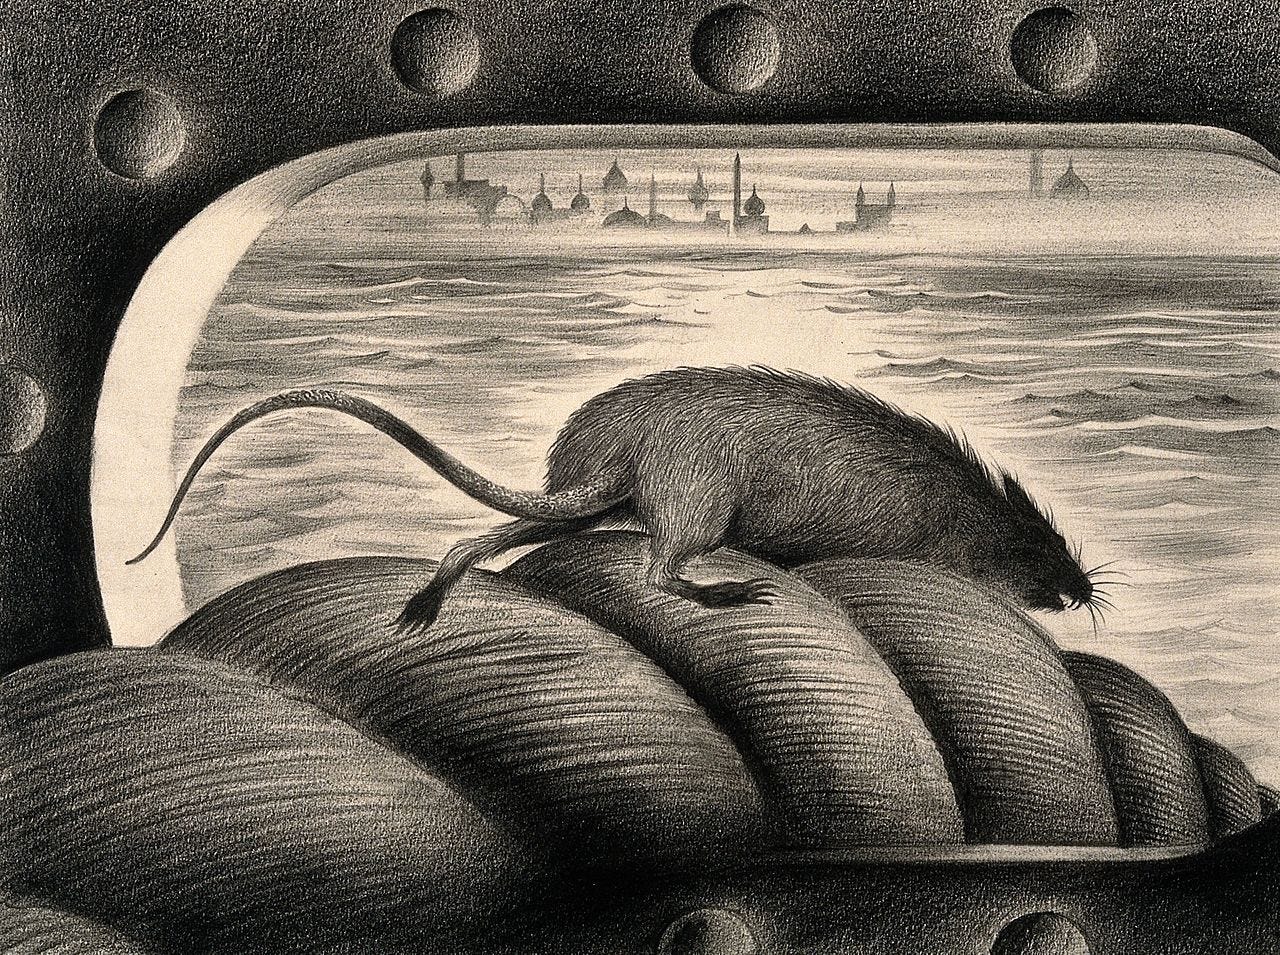 https://upload.wikimedia.org/wikipedia/commons/thumb/f/f3/A_rat_leaving_a_ship_via_the_mooring_rope%2C_thus_spreading_th_Wellcome_V0010685.jpg/1280px-A_rat_leaving_a_ship_via_the_mooring_rope%2C_thus_spreading_th_Wellcome_V0010685.jpg